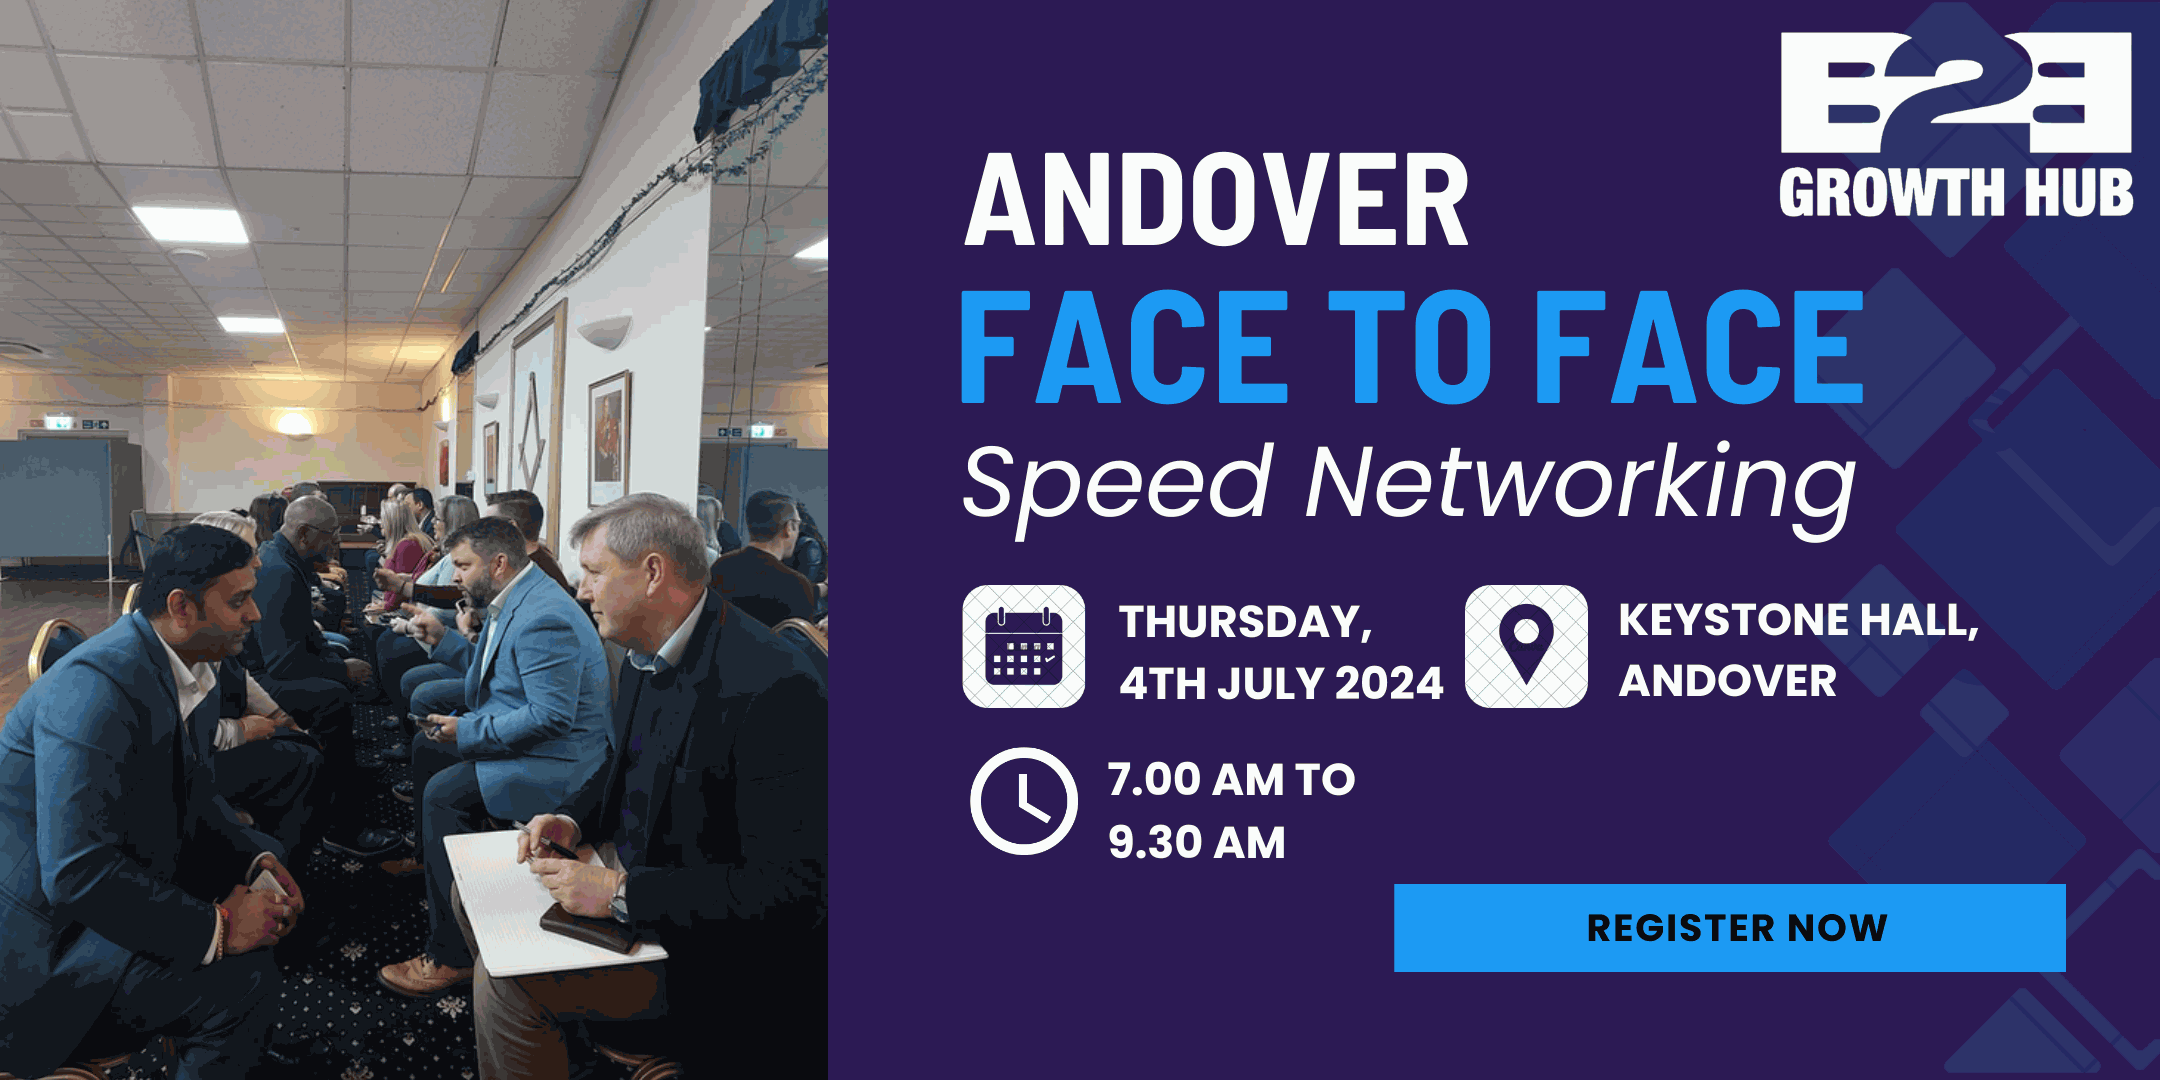 Andover Face 2 Face Morning Speed Networking - 04th July 2024